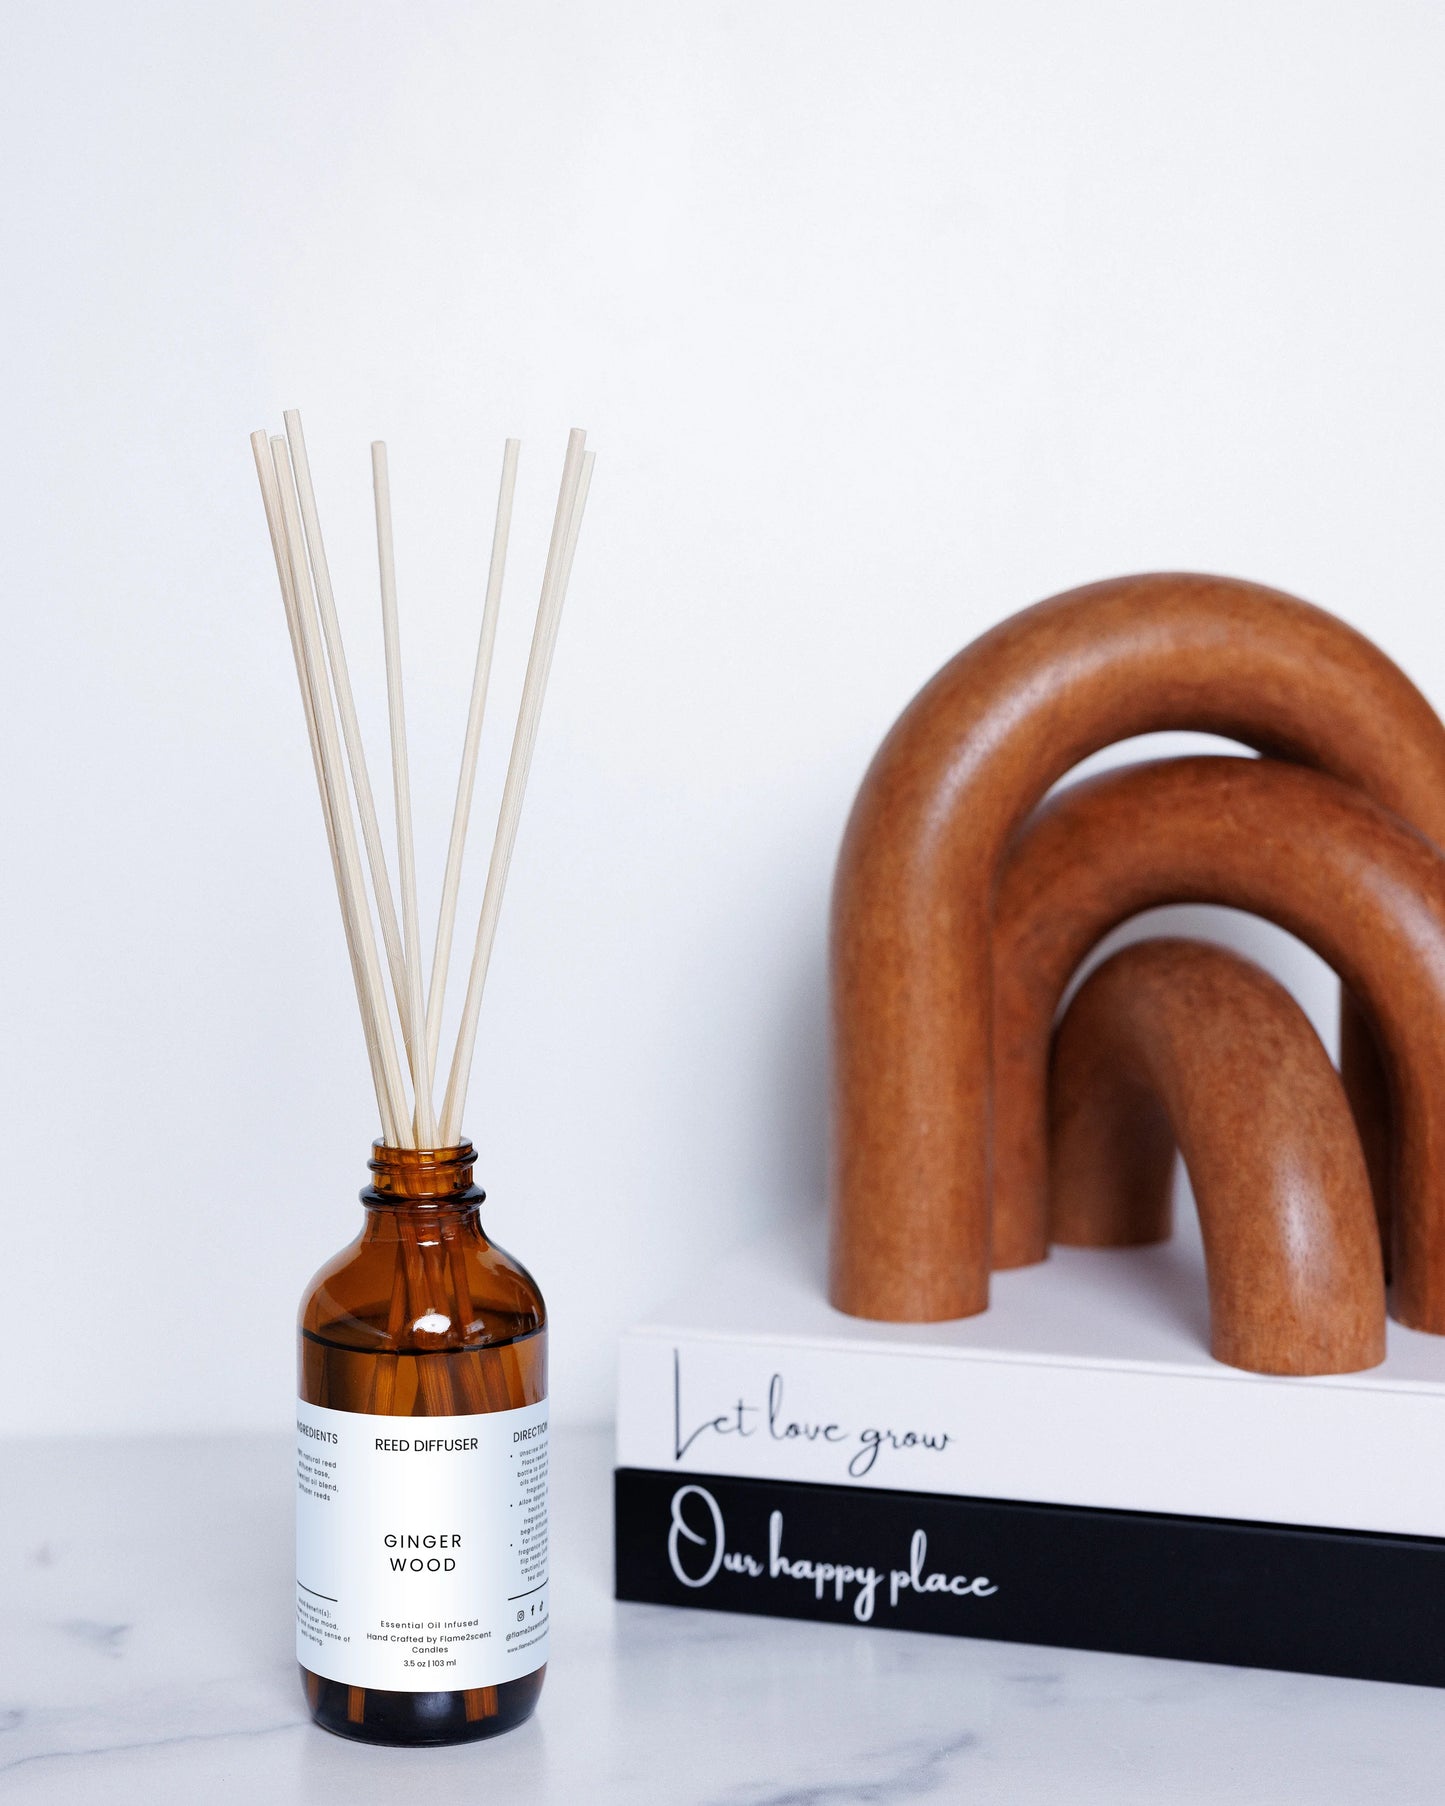 Ginger Wood - Reed Diffuser